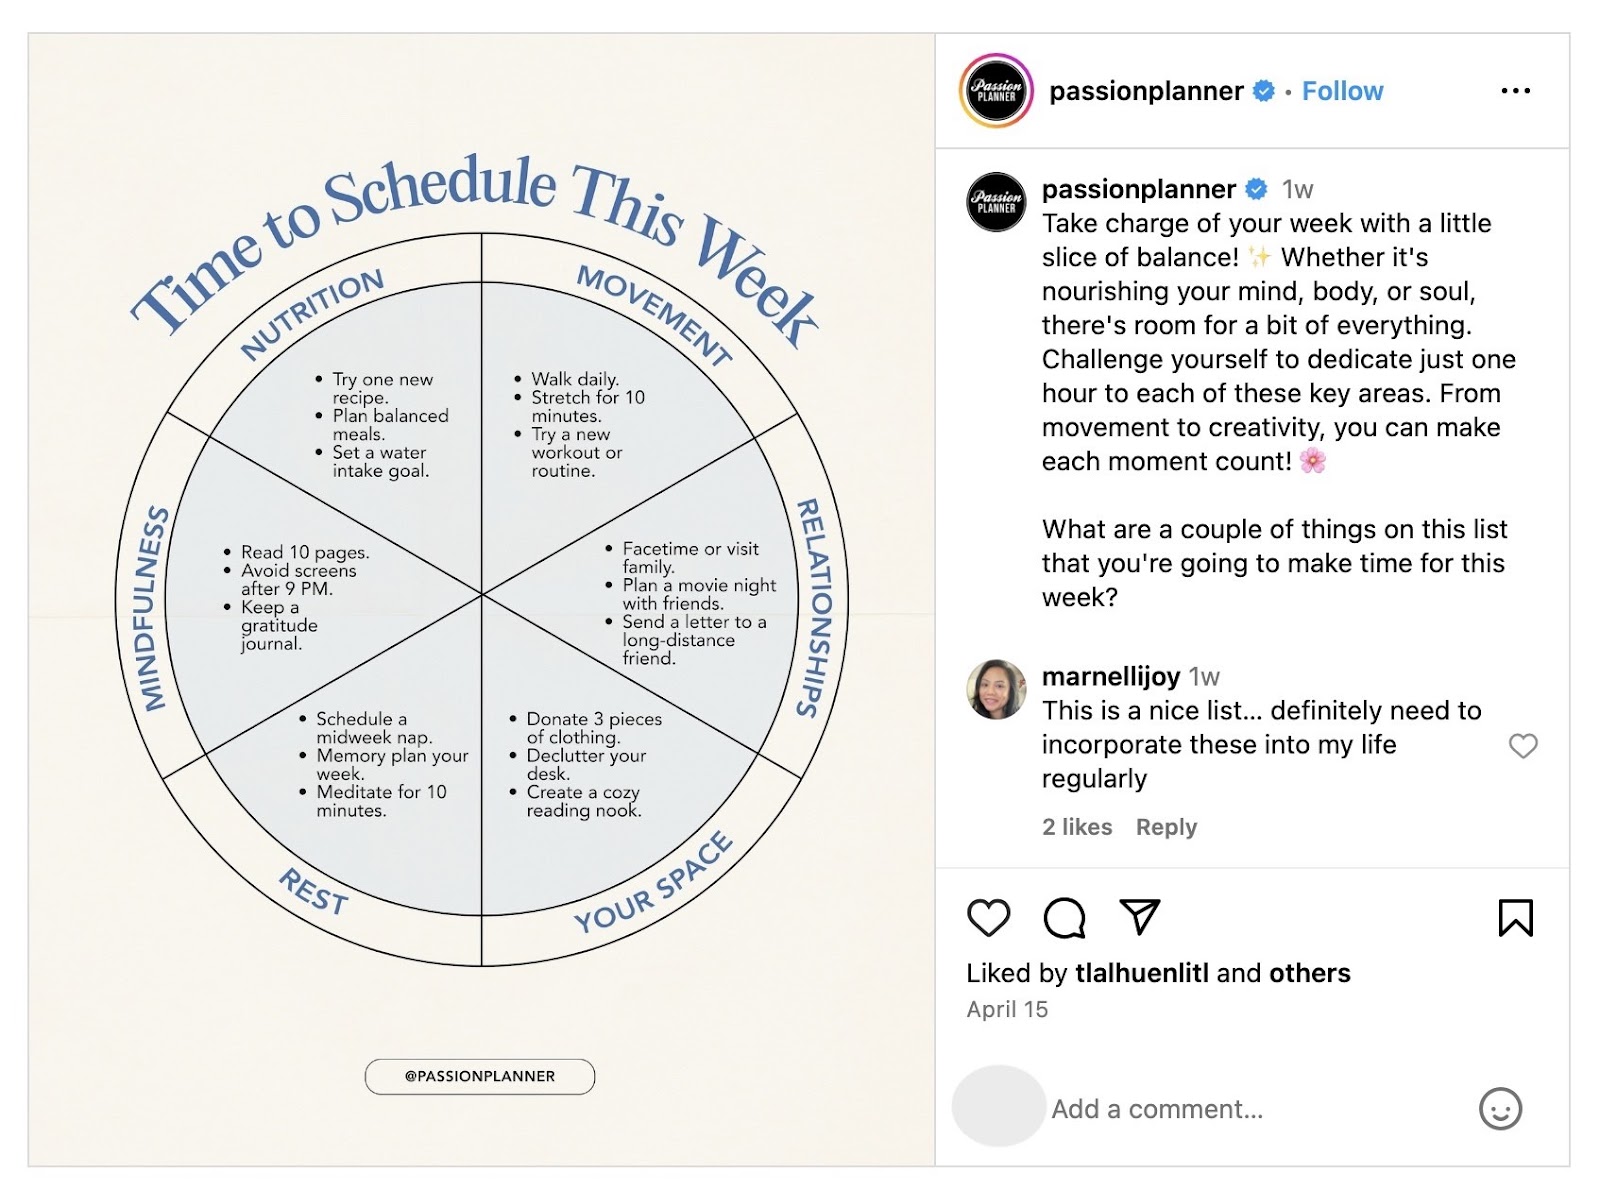 Post on Instagram by 'Passion Planner' with educational content that helps plan and schedule the week's activities.